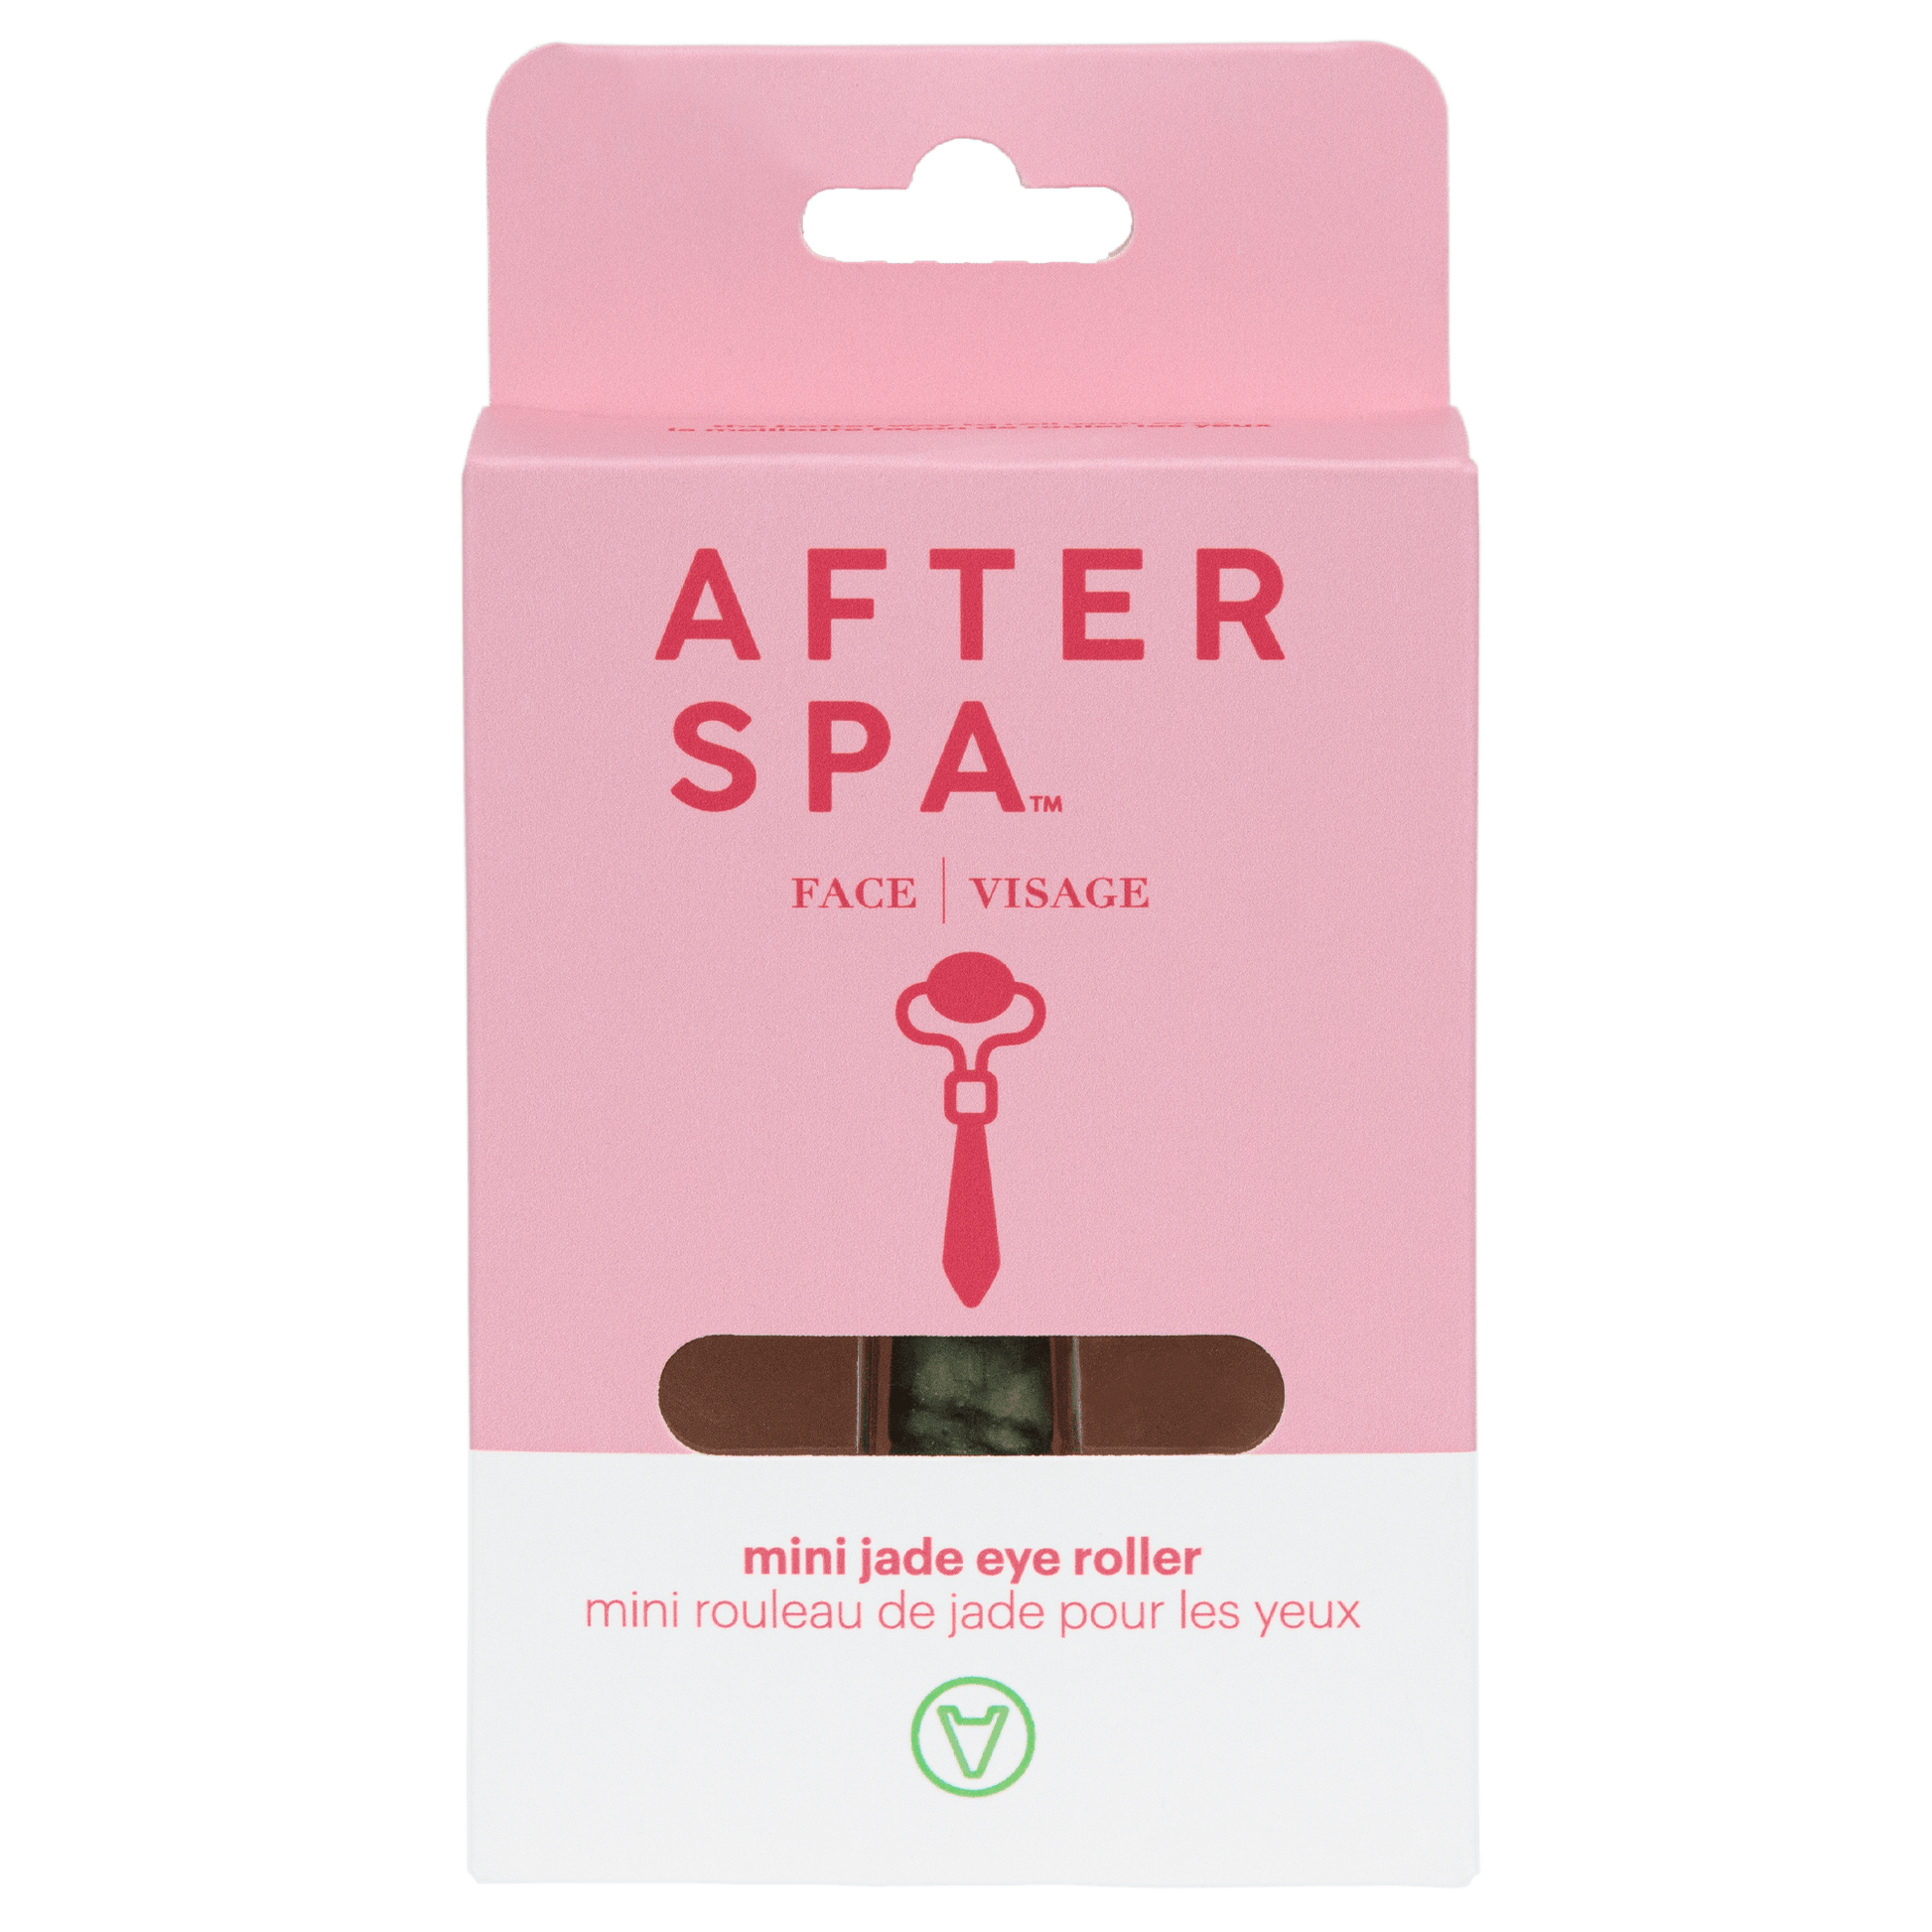 Afterspa Mini Jade Eye Roller Skincare Routine To Depuff The Eye Area